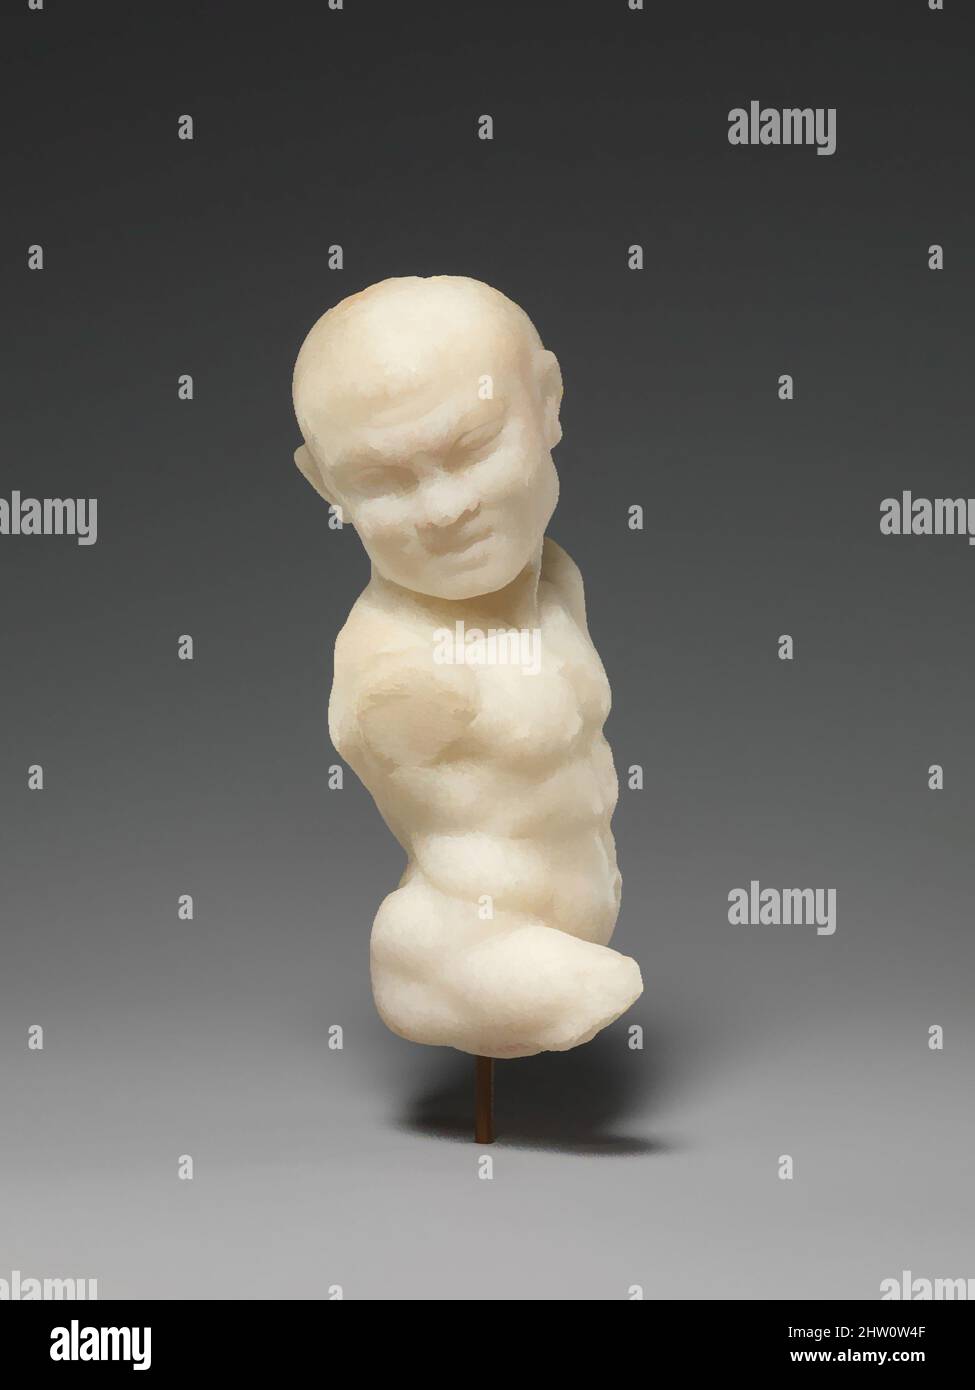 Art inspired by Dancing dwarf, Ptolemaic Period, 332–150 B.C., From Egypt, Marble, H. 10 cm (3 15/16 in.); W. 4.9 cm (1 15/16 in.); D. 4.2 cm (1 5/8 in.), The marble dancing dwarf with his fine features is almost certainly from Alexandria. As in so many aspects of Ptolemaic art, the, Classic works modernized by Artotop with a splash of modernity. Shapes, color and value, eye-catching visual impact on art. Emotions through freedom of artworks in a contemporary way. A timeless message pursuing a wildly creative new direction. Artists turning to the digital medium and creating the Artotop NFT Stock Photo